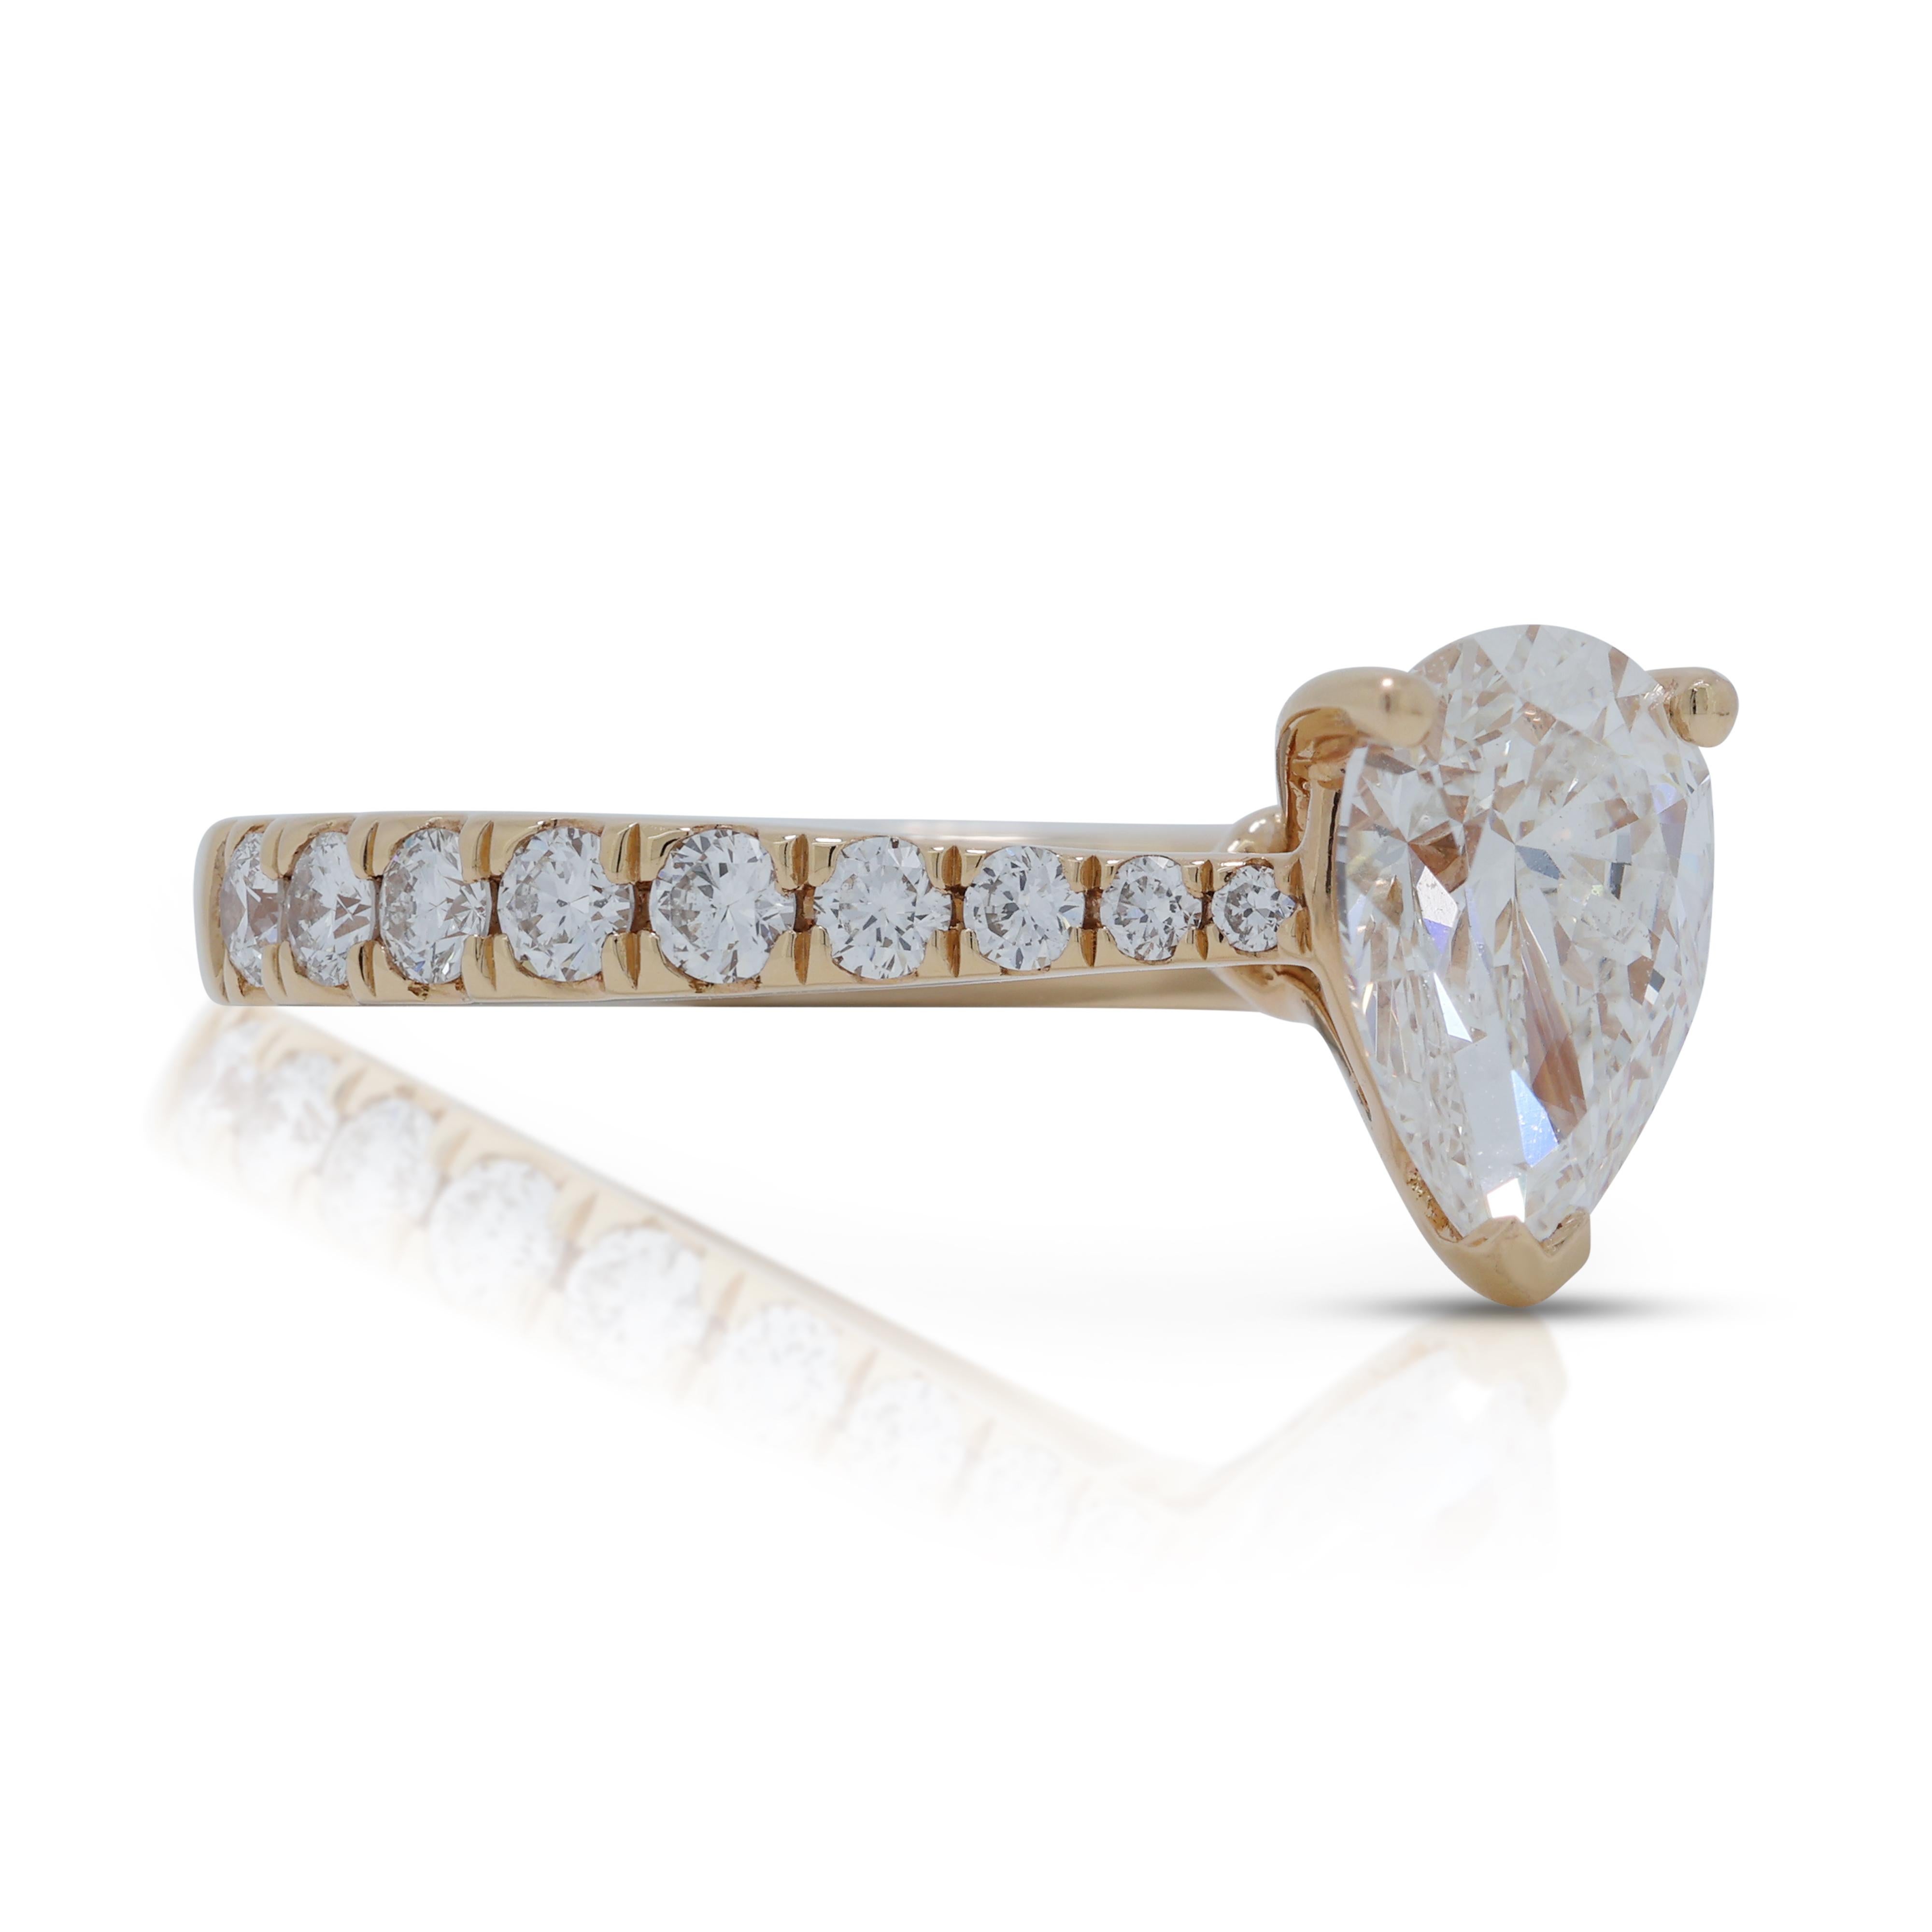 Mesmerizing 1.13ct Diamonds Pave Ring in 18K Rose Gold In Excellent Condition For Sale In רמת גן, IL